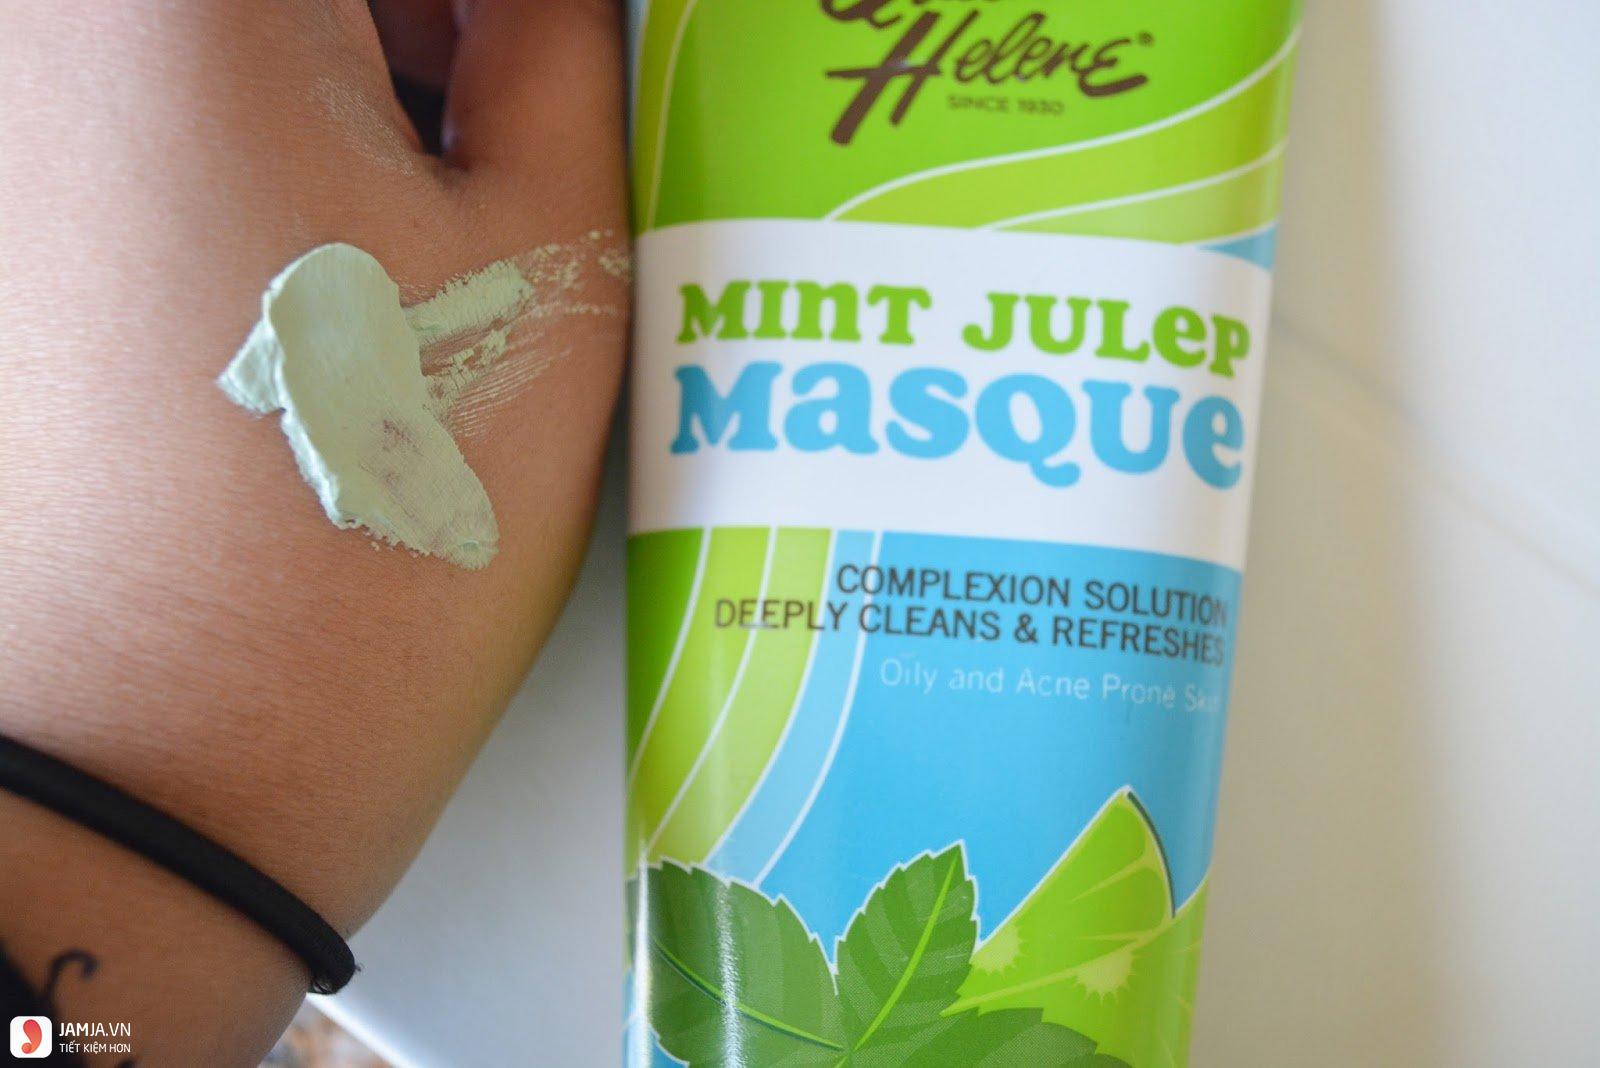 Mặt nạ Queen Helene Mint Julep Masque review 1